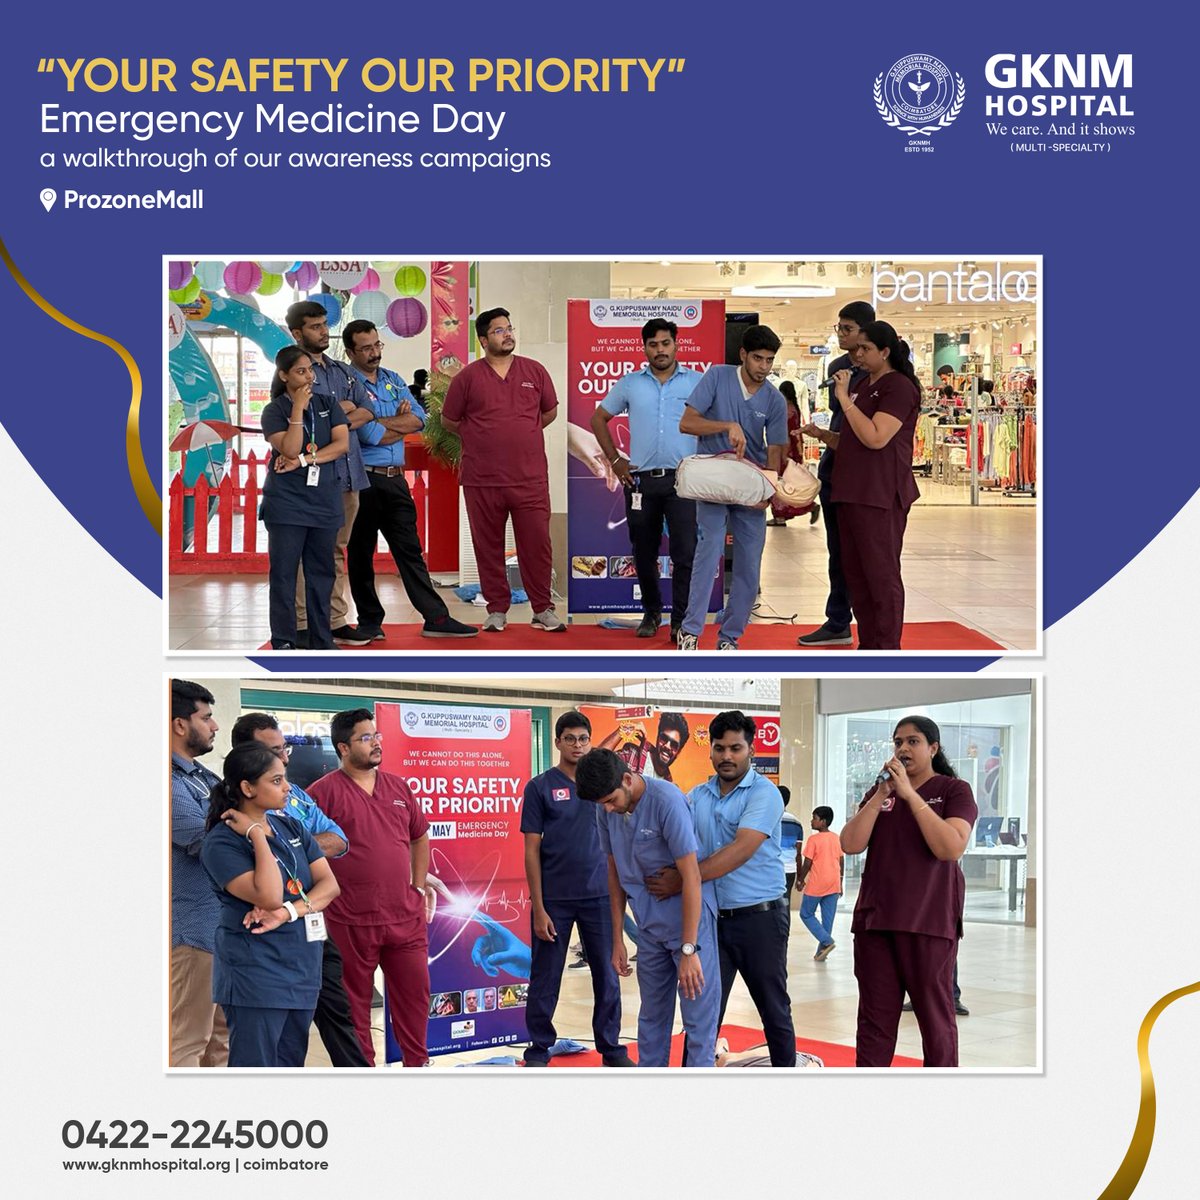 Raising #awareness on the #EmergencyMedicineDay #May27, we organized a chain of events and #awarenesscampaigns in #ProzoneMall, our hospital outdoor and indoor A block with the theme “ #Yoursafetyourpriority”. 

#PatientSafety #EmergencyMedicine  #GKNM #GKNMH #GKNMHospital